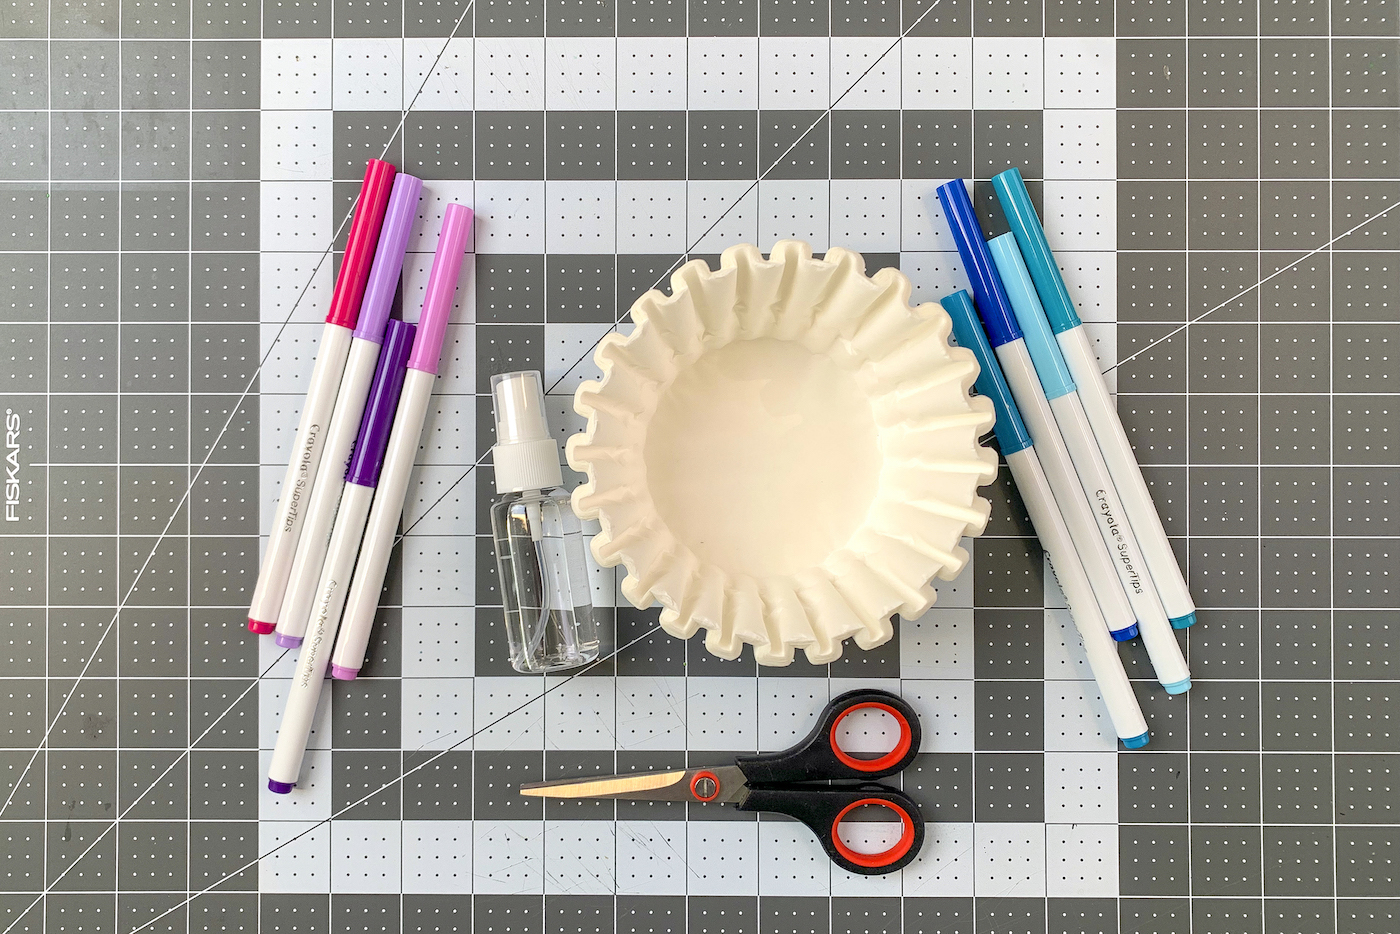 Coffee filters, markers, scissors, and spray bottle